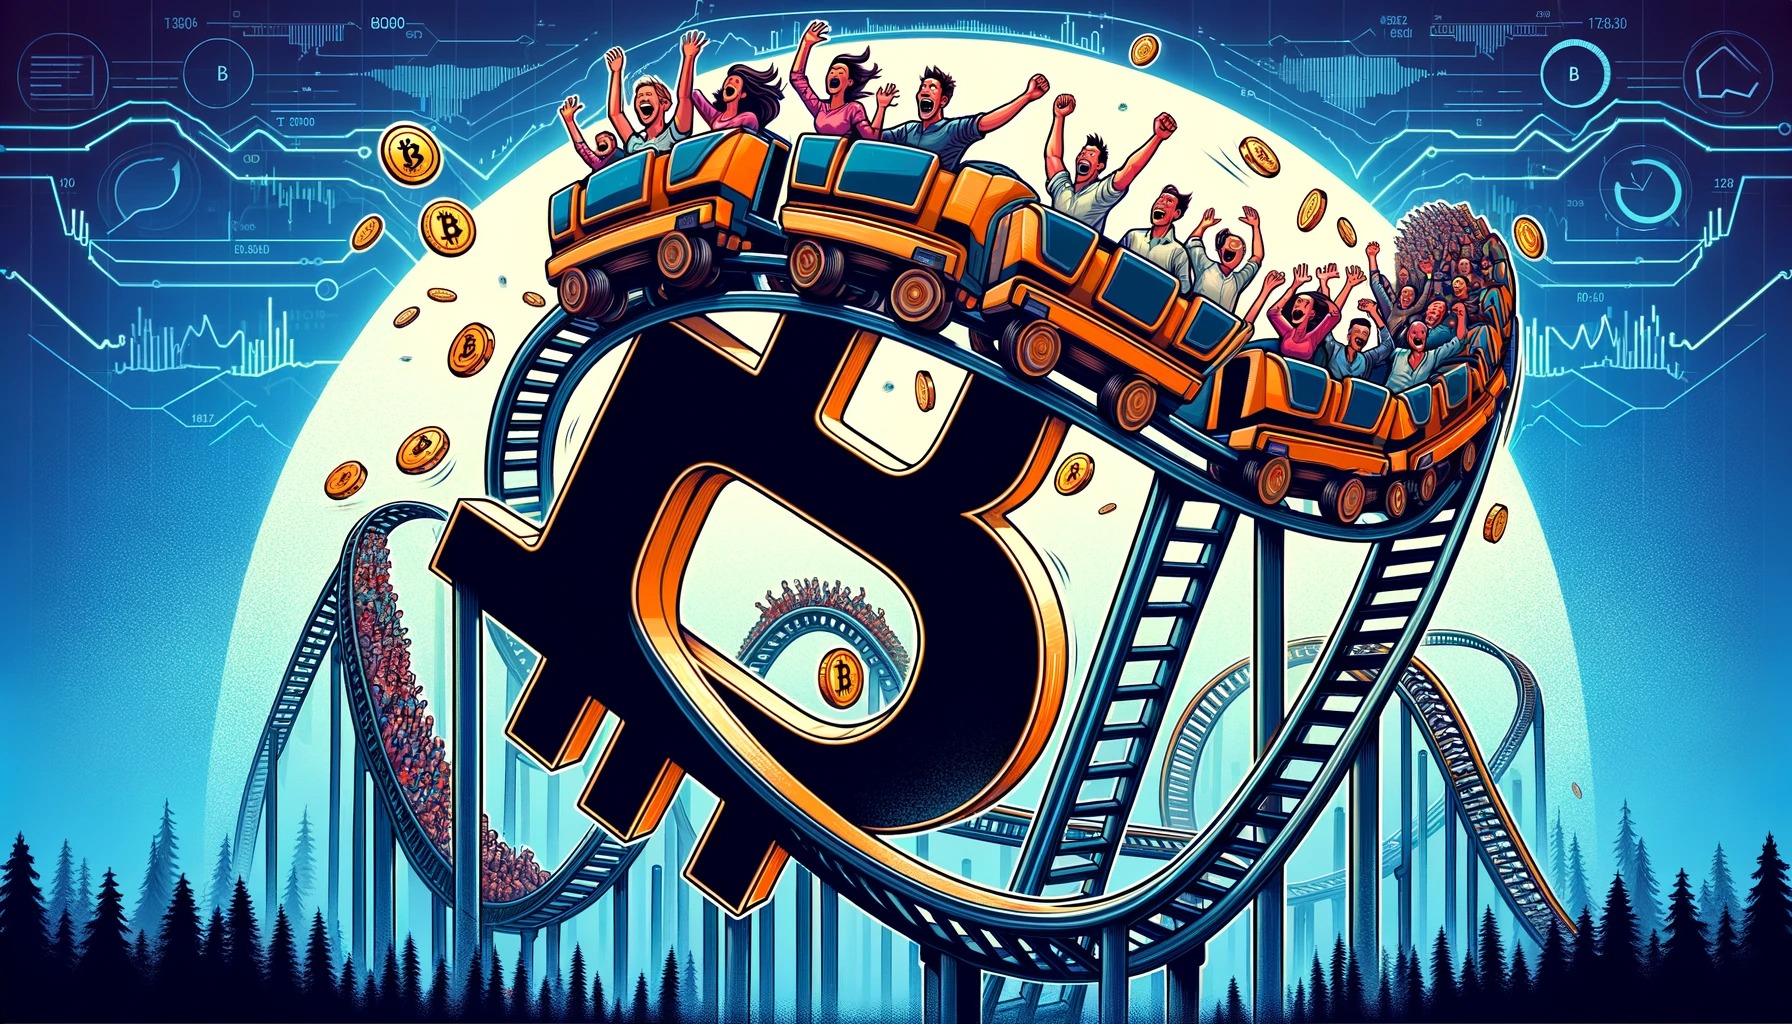 An illustration of a rollercoaster track shaped like the Bitcoin logo, with a cart full of investors holding onto their hats as they navigate the ups and downs, representing the volatility leading up to the halving event.